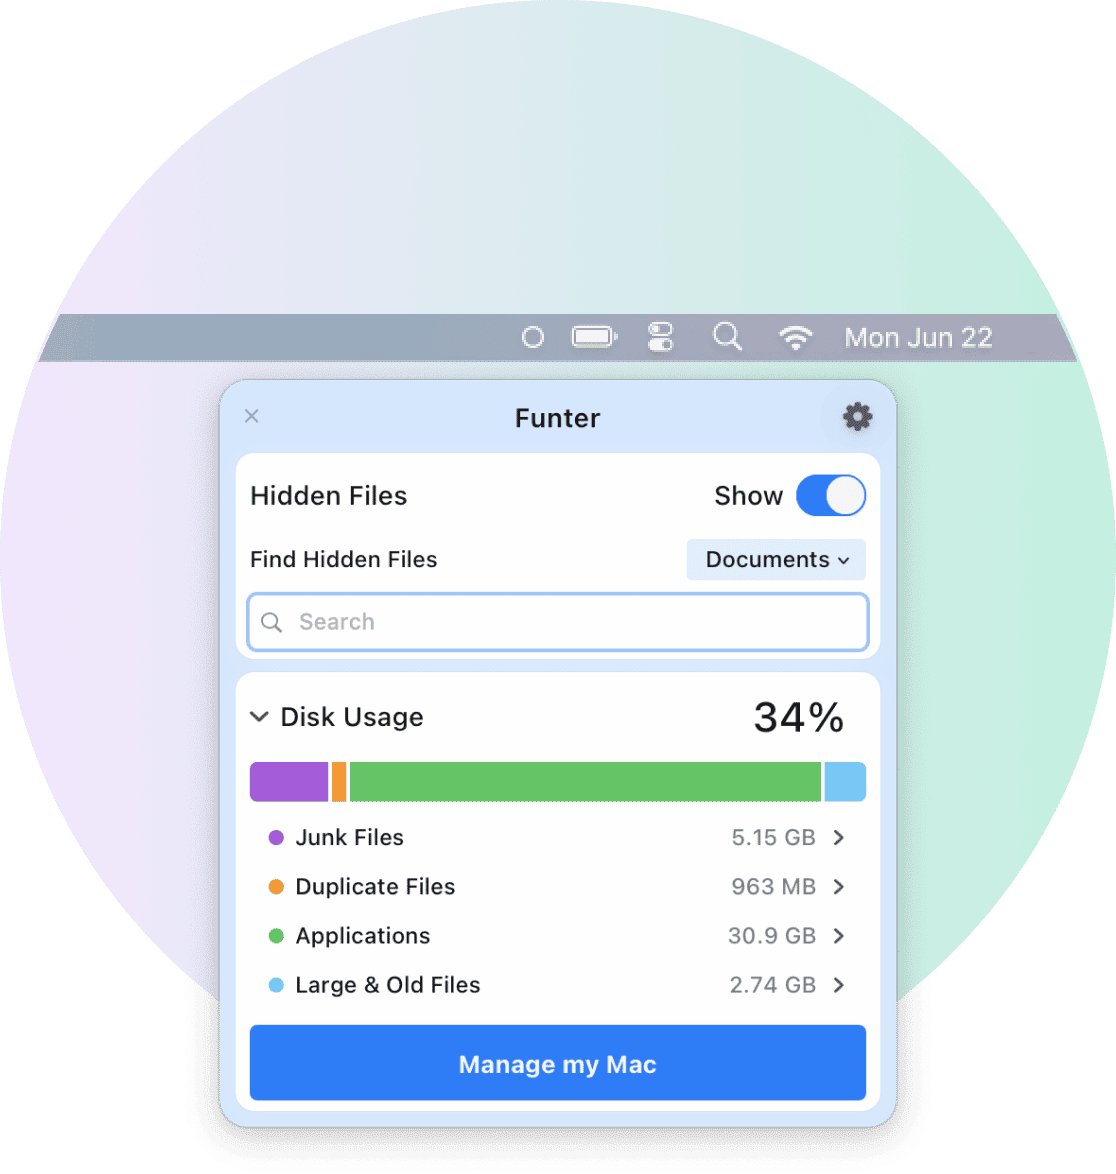 Funter window showing memory and disk usage on Mac